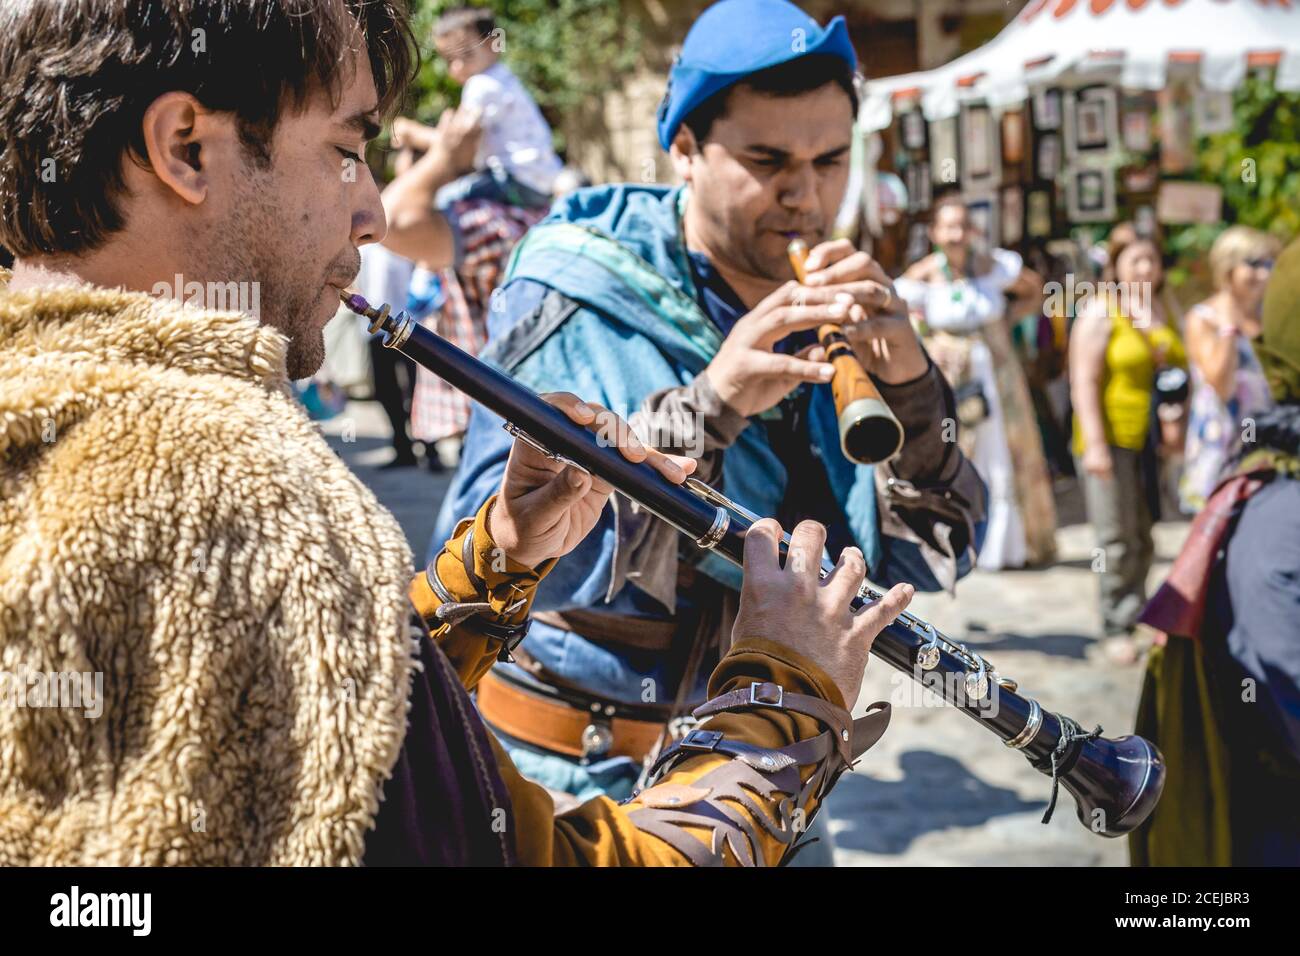 MEDIEVAL MARKET - PUEBLA DE SANABRIA - ZAMORA - SPAIN - AGOUST 13, 2017: Group of musicians in traditional clothes jamming on street during the funfair Stock Photo